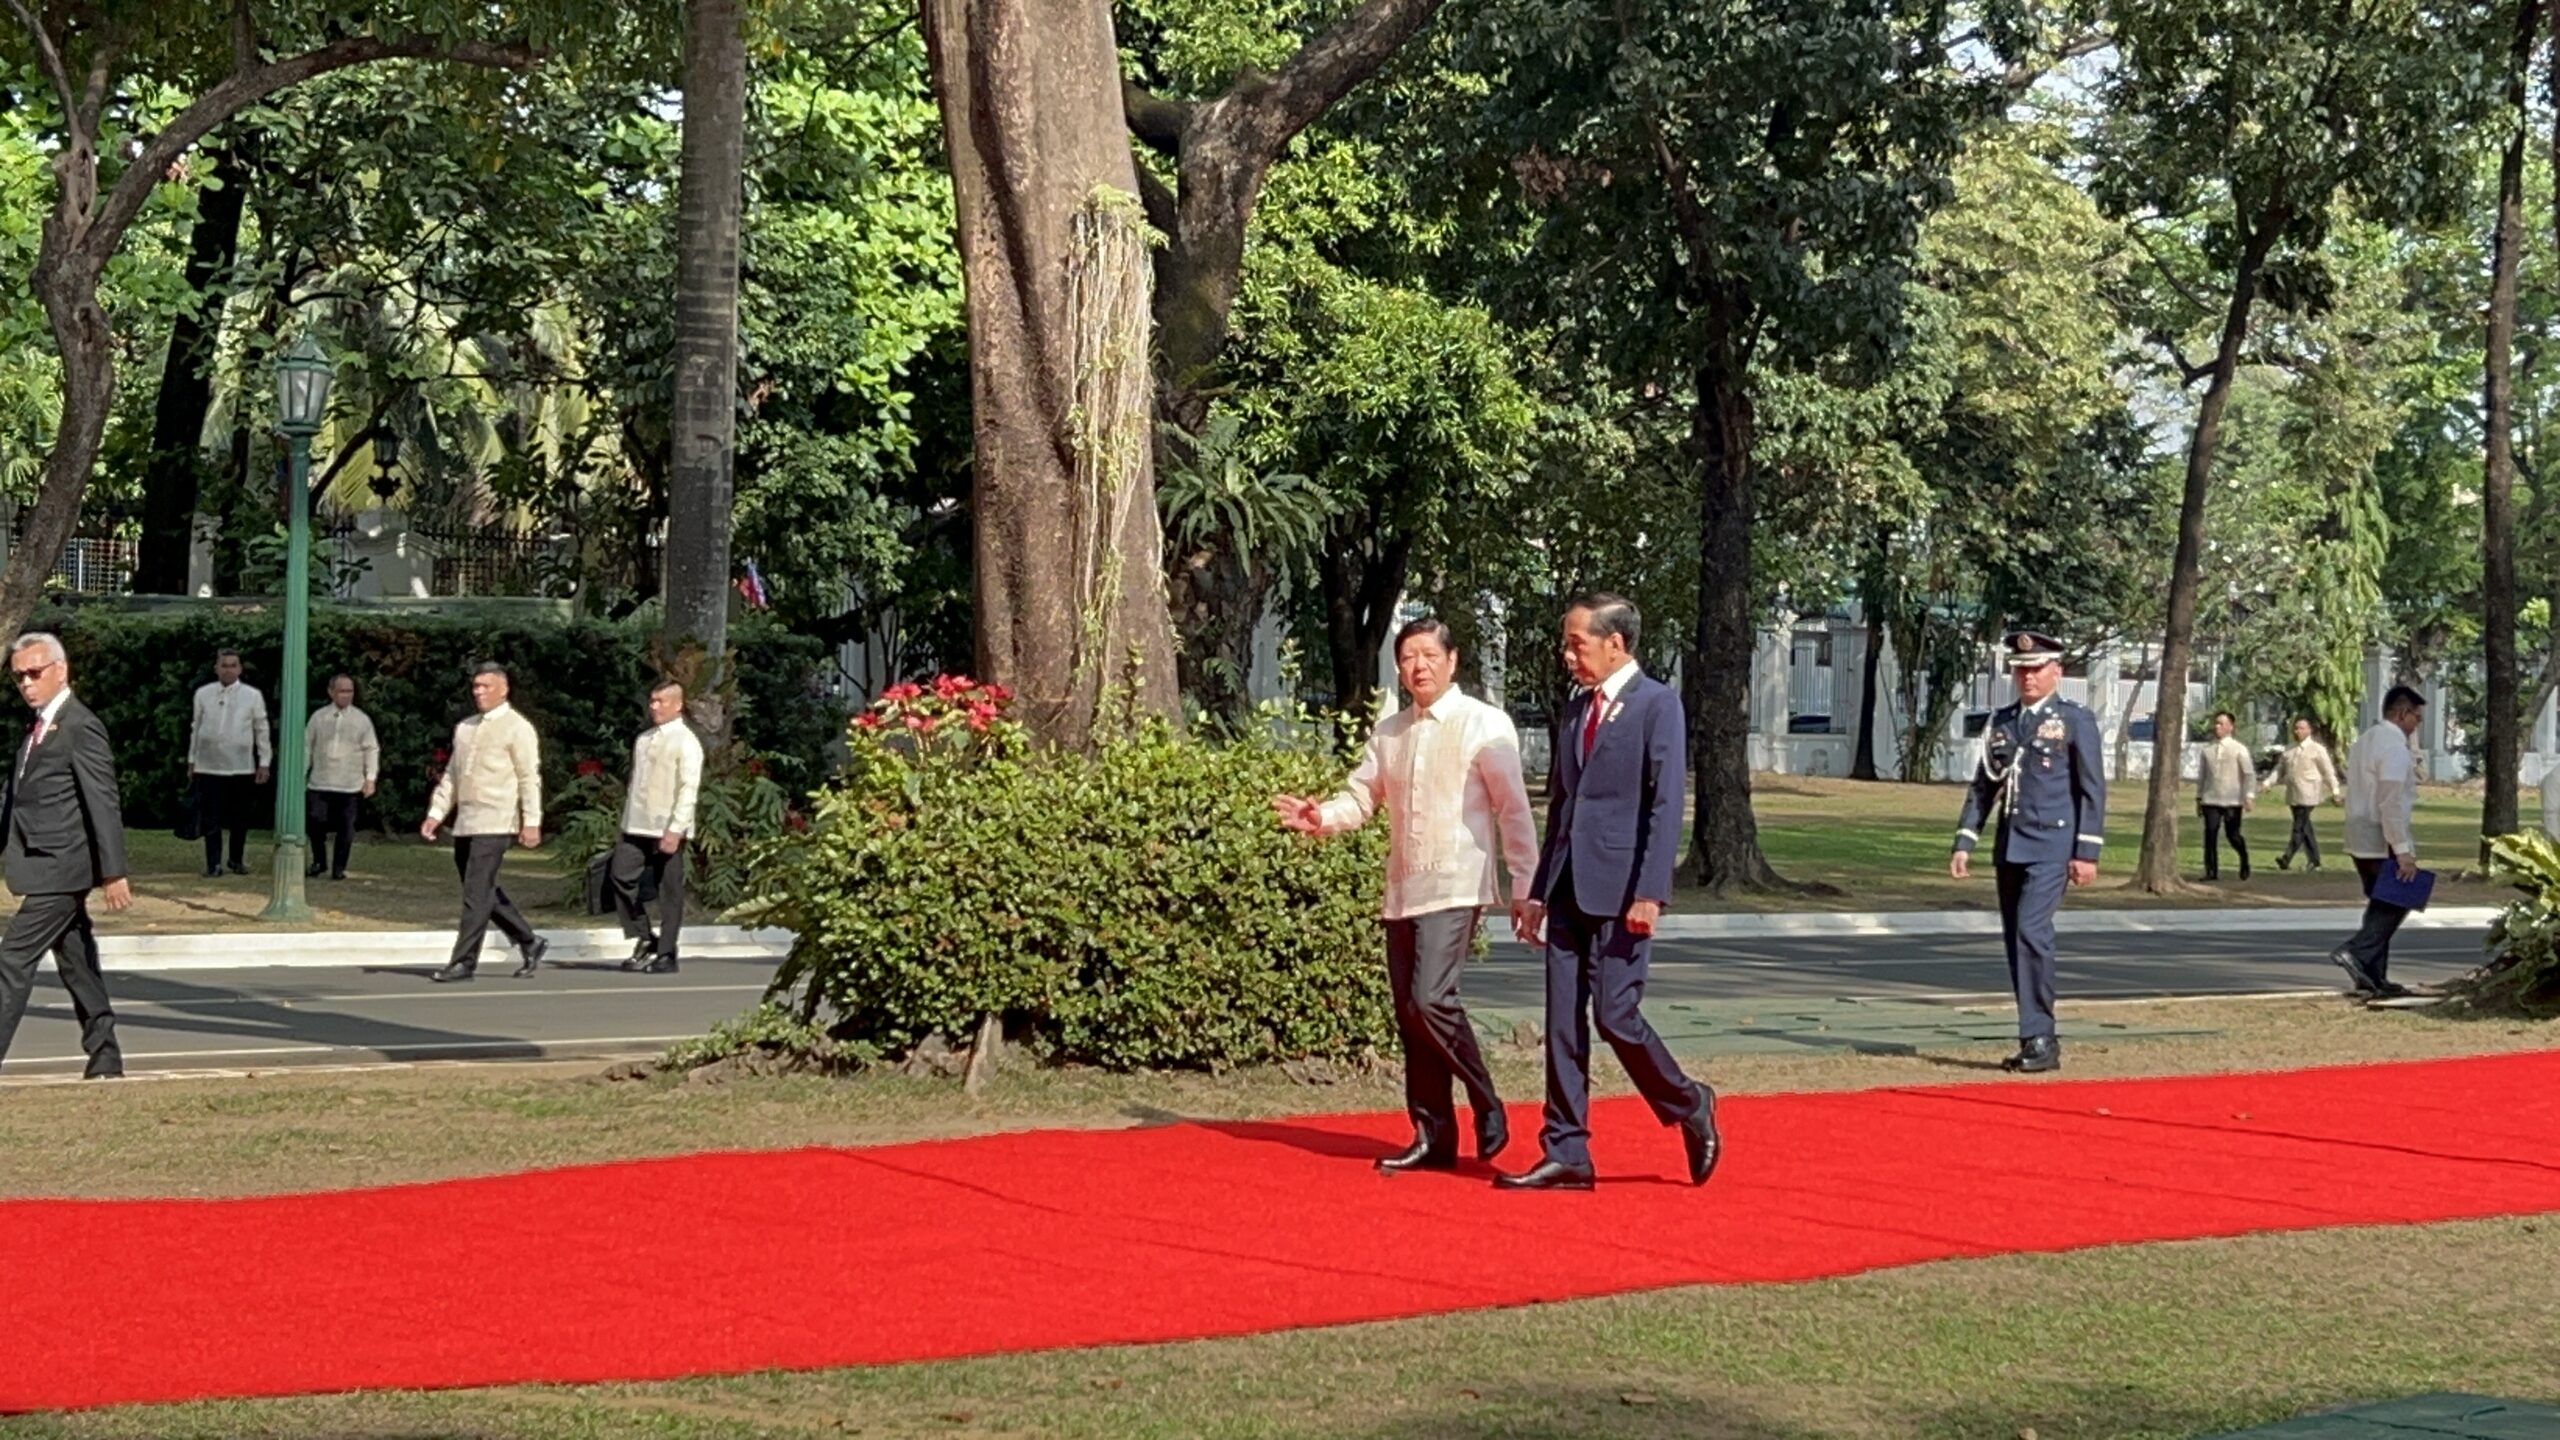 Bongbong Marcos welcomes Indonesian President Widodo to Palace